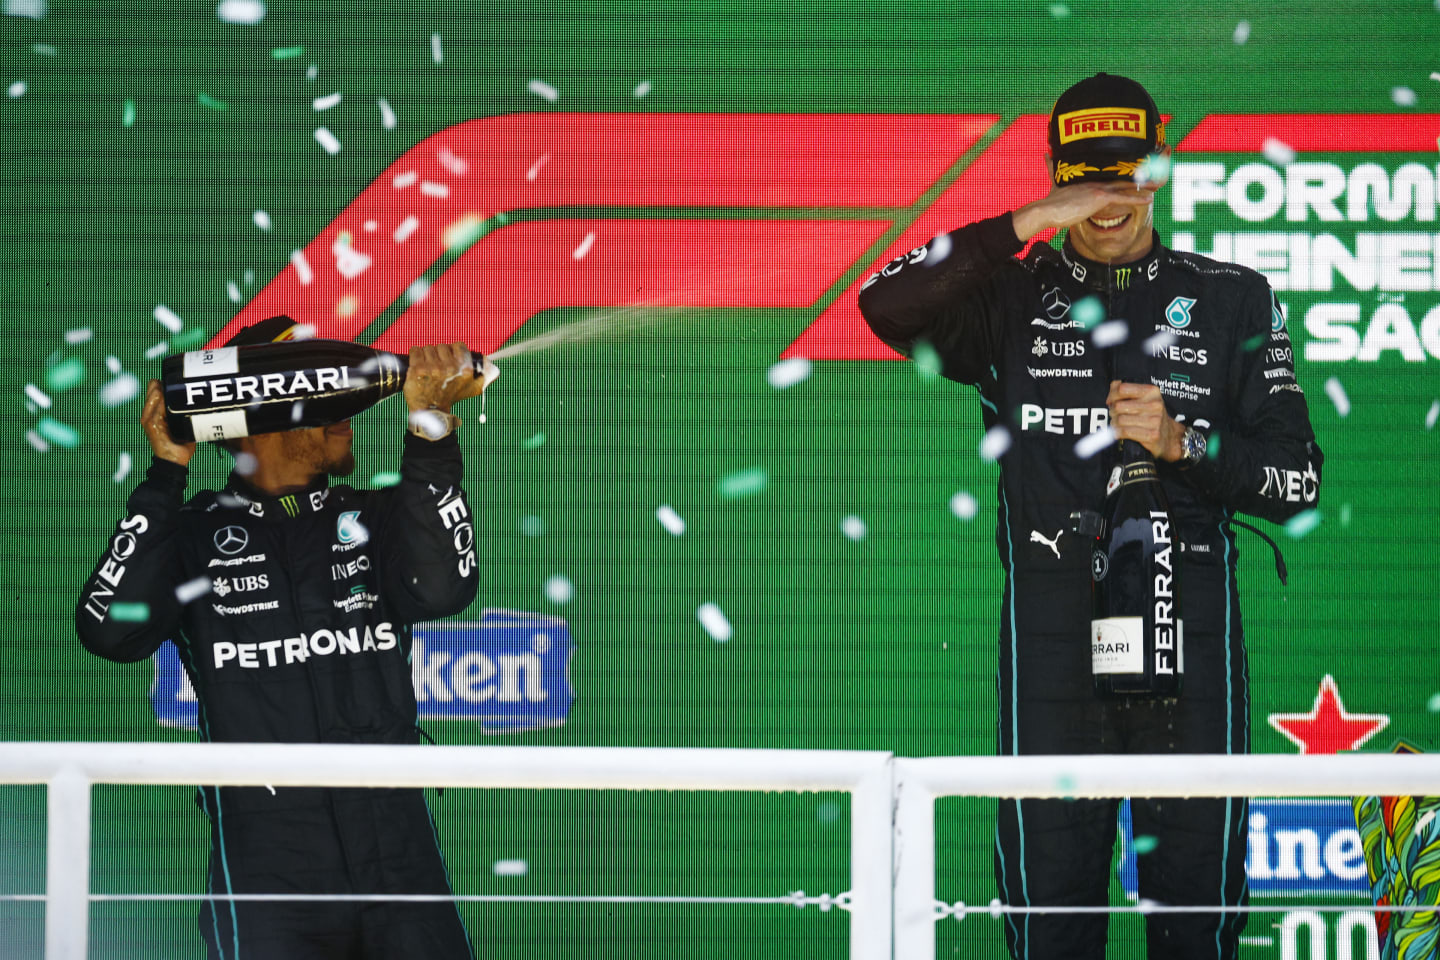 SAO PAULO, BRAZIL - NOVEMBER 13: Race winner George Russell of Great Britain and Mercedes and Second placed Lewis Hamilton of Great Britain and Mercedes celebrate on the podium during the F1 Grand Prix of Brazil at Autodromo Jose Carlos Pace on November 13, 2022 in Sao Paulo, Brazil. (Photo by Chris Graythen/Getty Images)